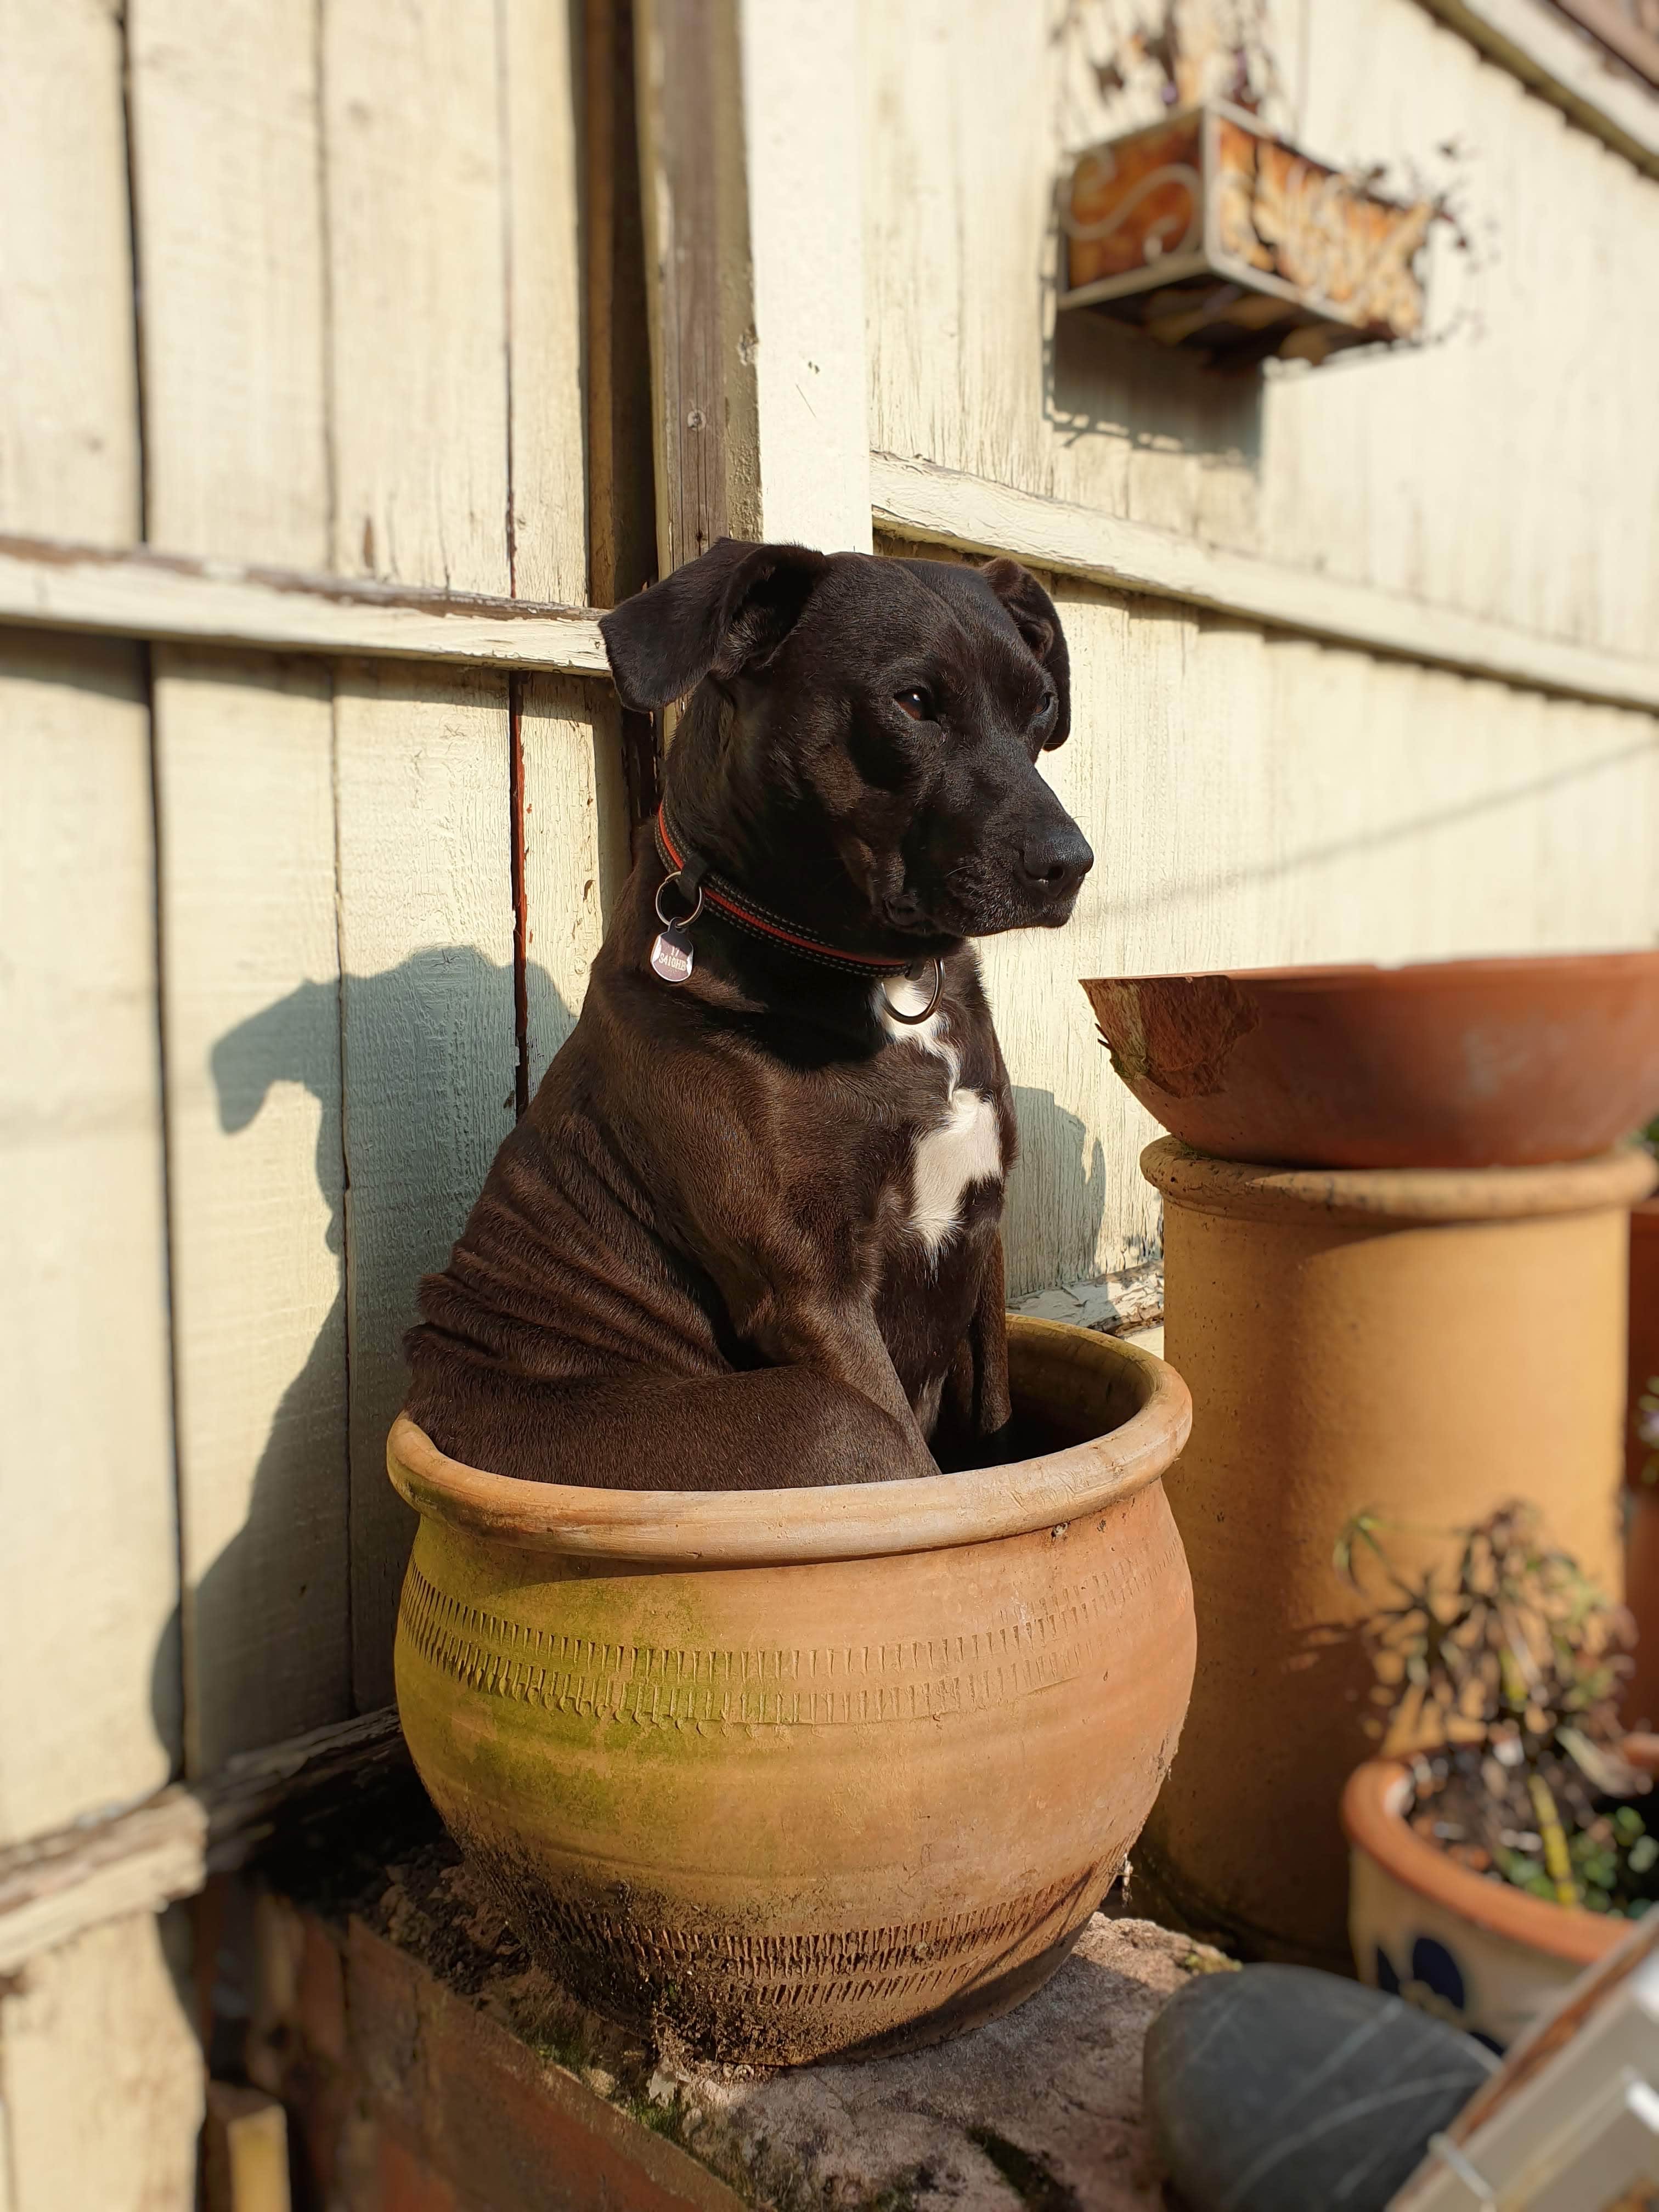 A Dog Sitting in a Plant Pot